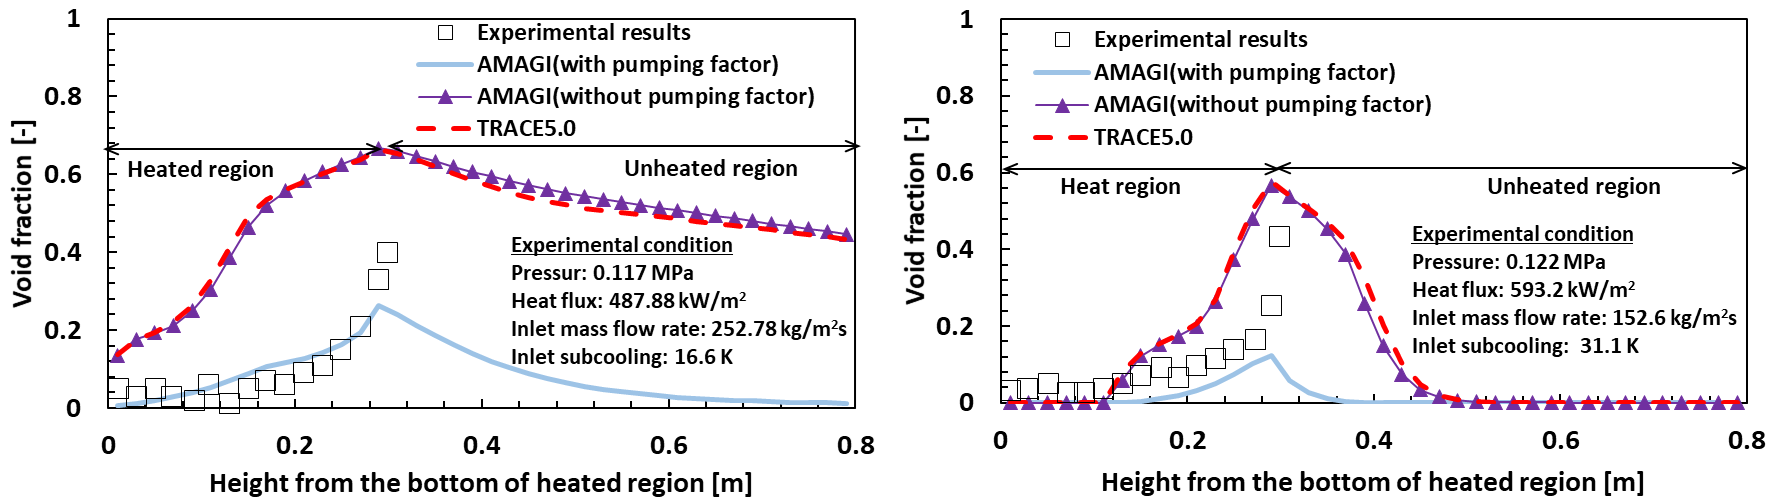 Comparison between experimental and calculated results on low pressure subcooled boiling experiments of Zeitoun et al. (© NRA)